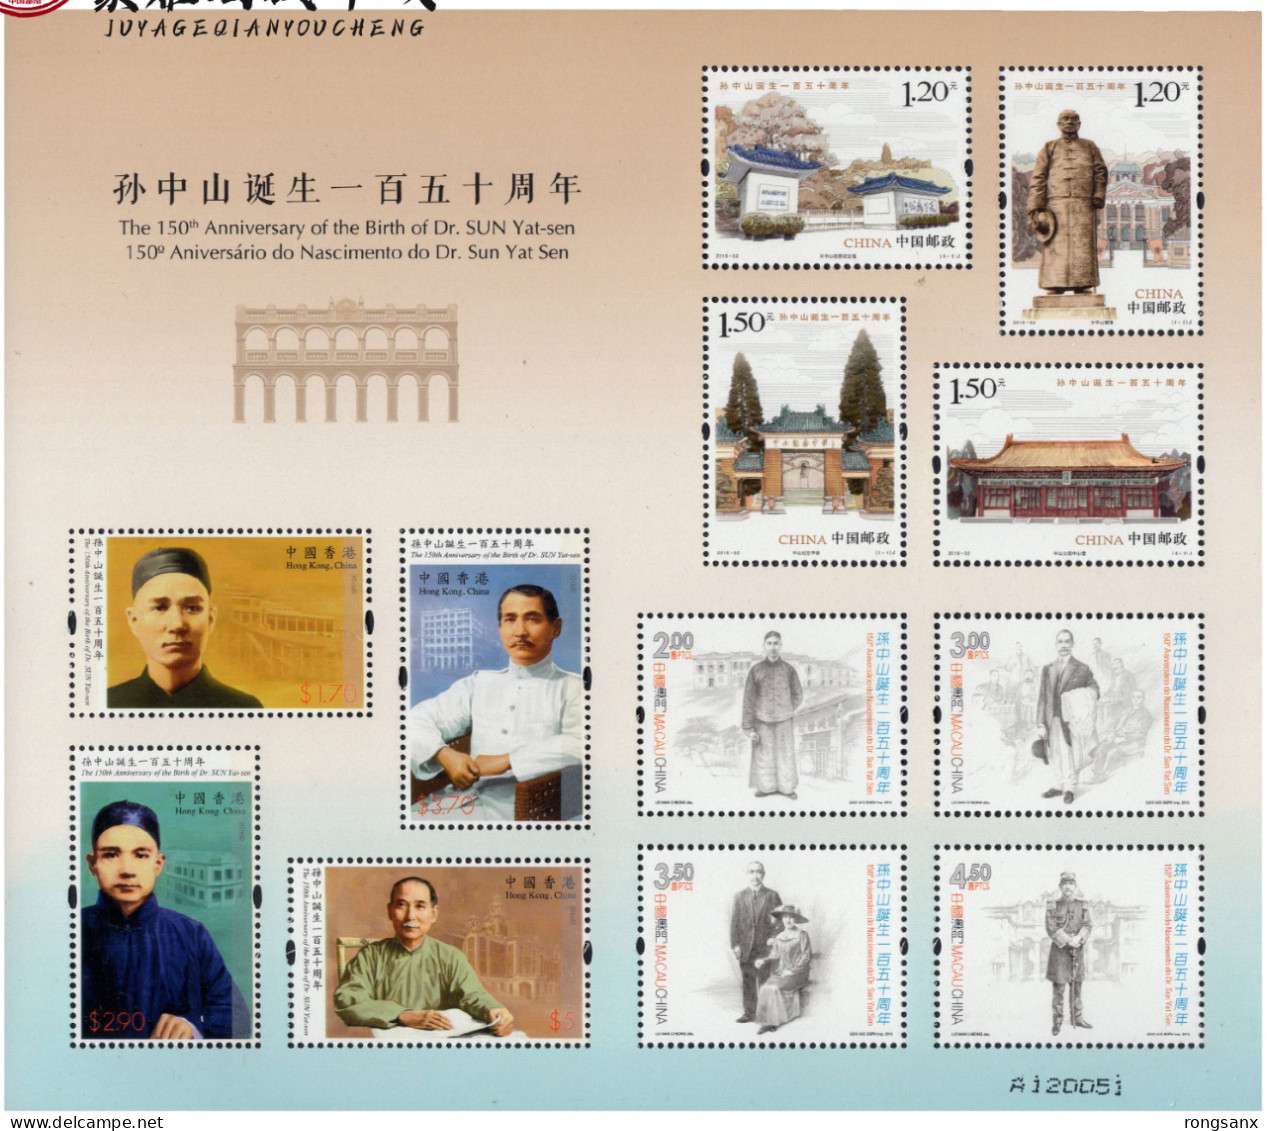 2016 CHINA-HONG KONG-MACAO JOINT 150 ANNI. OF DR.SUN YAT SEN SPECIAL SHEETLET - Emissioni Congiunte